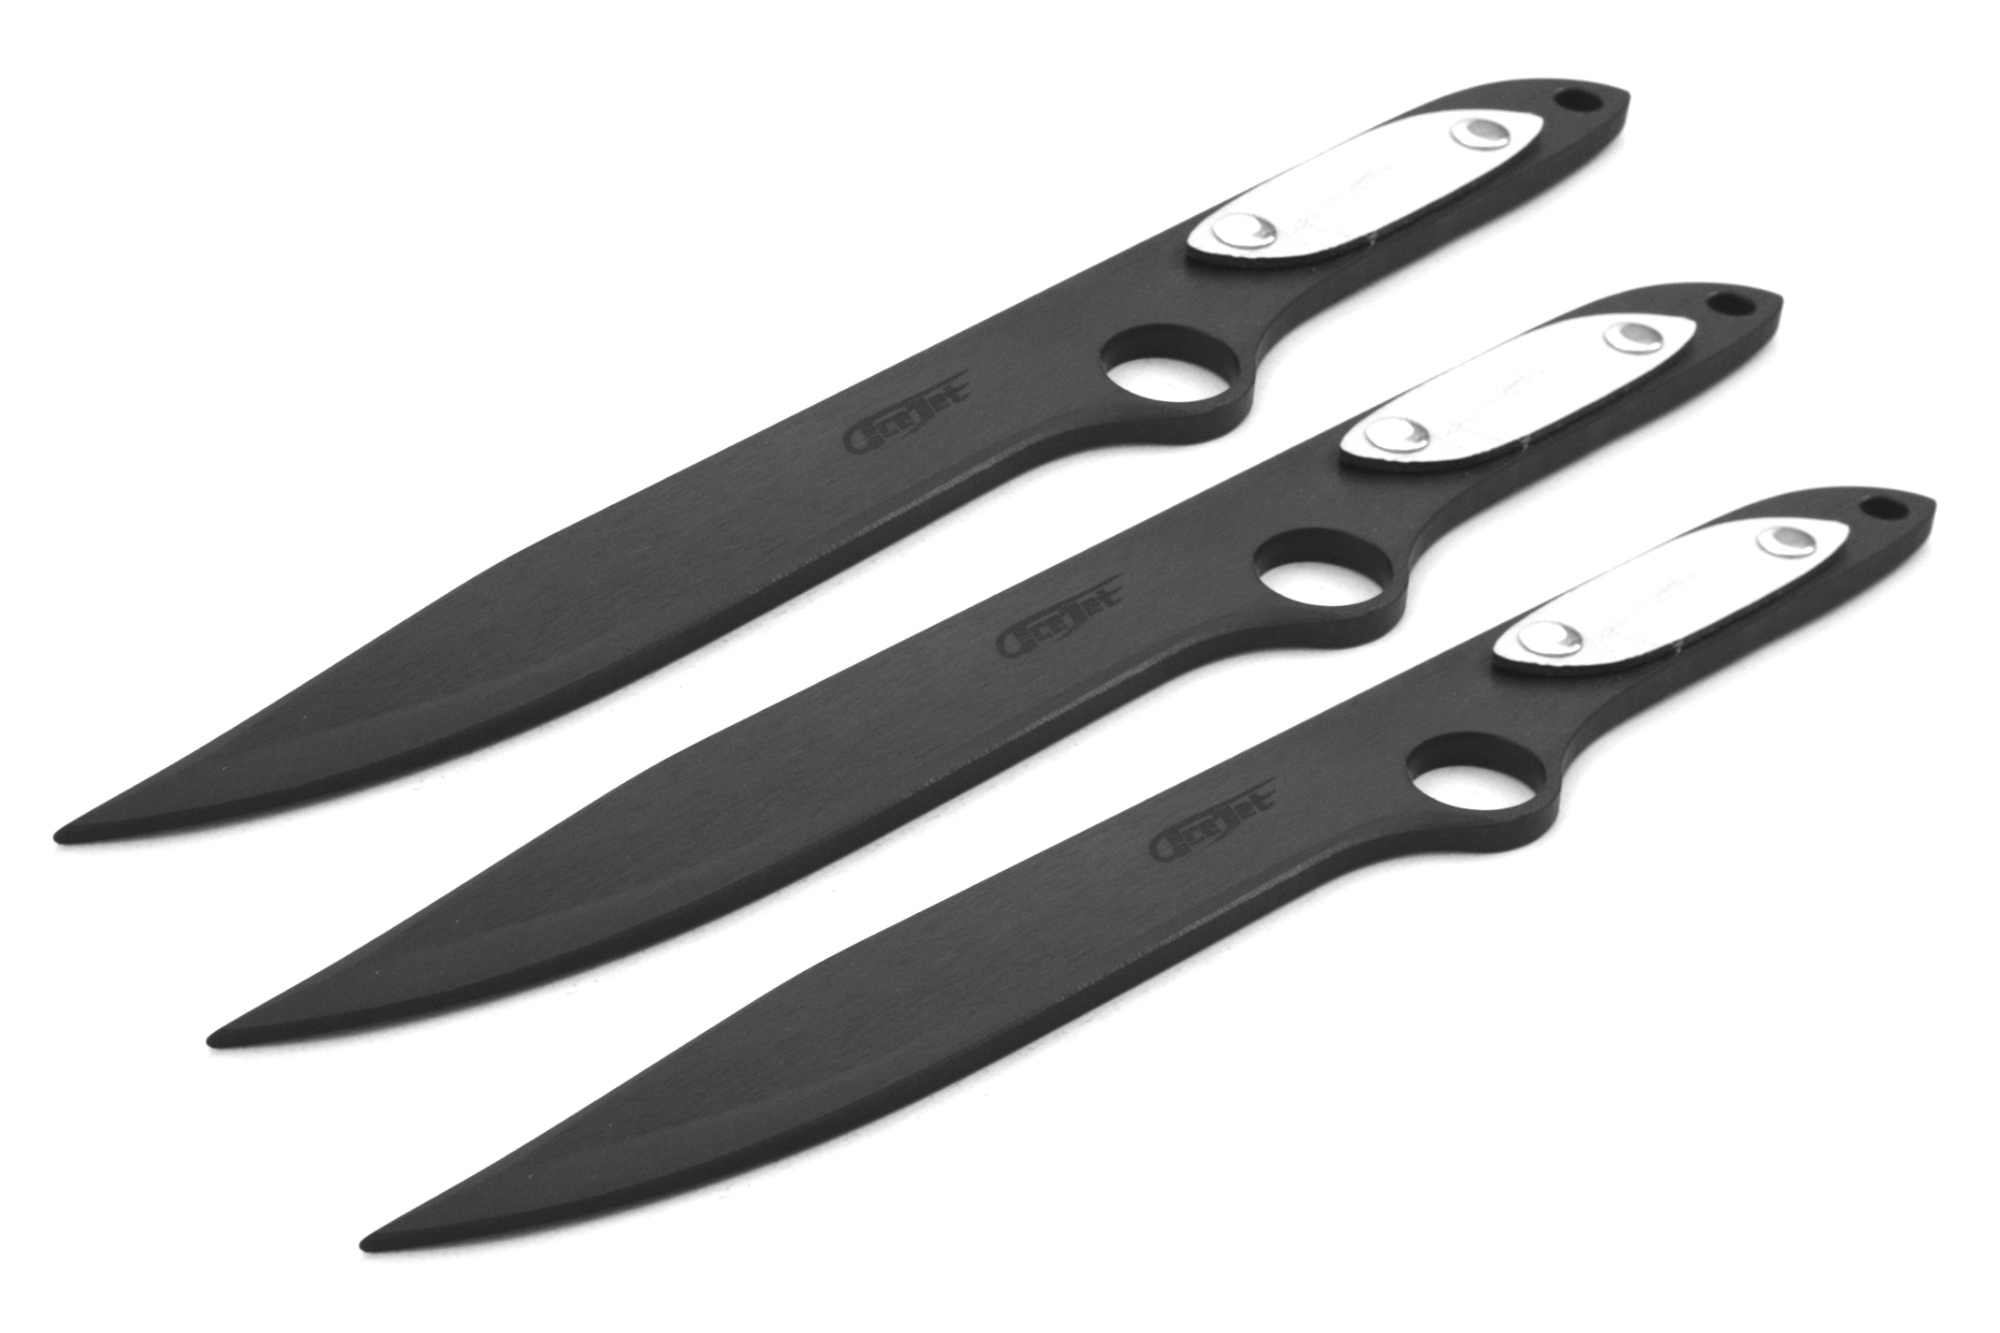 ACEJET SPINNER BOWIE Shadow Hunter - Throwing knife - set of 3